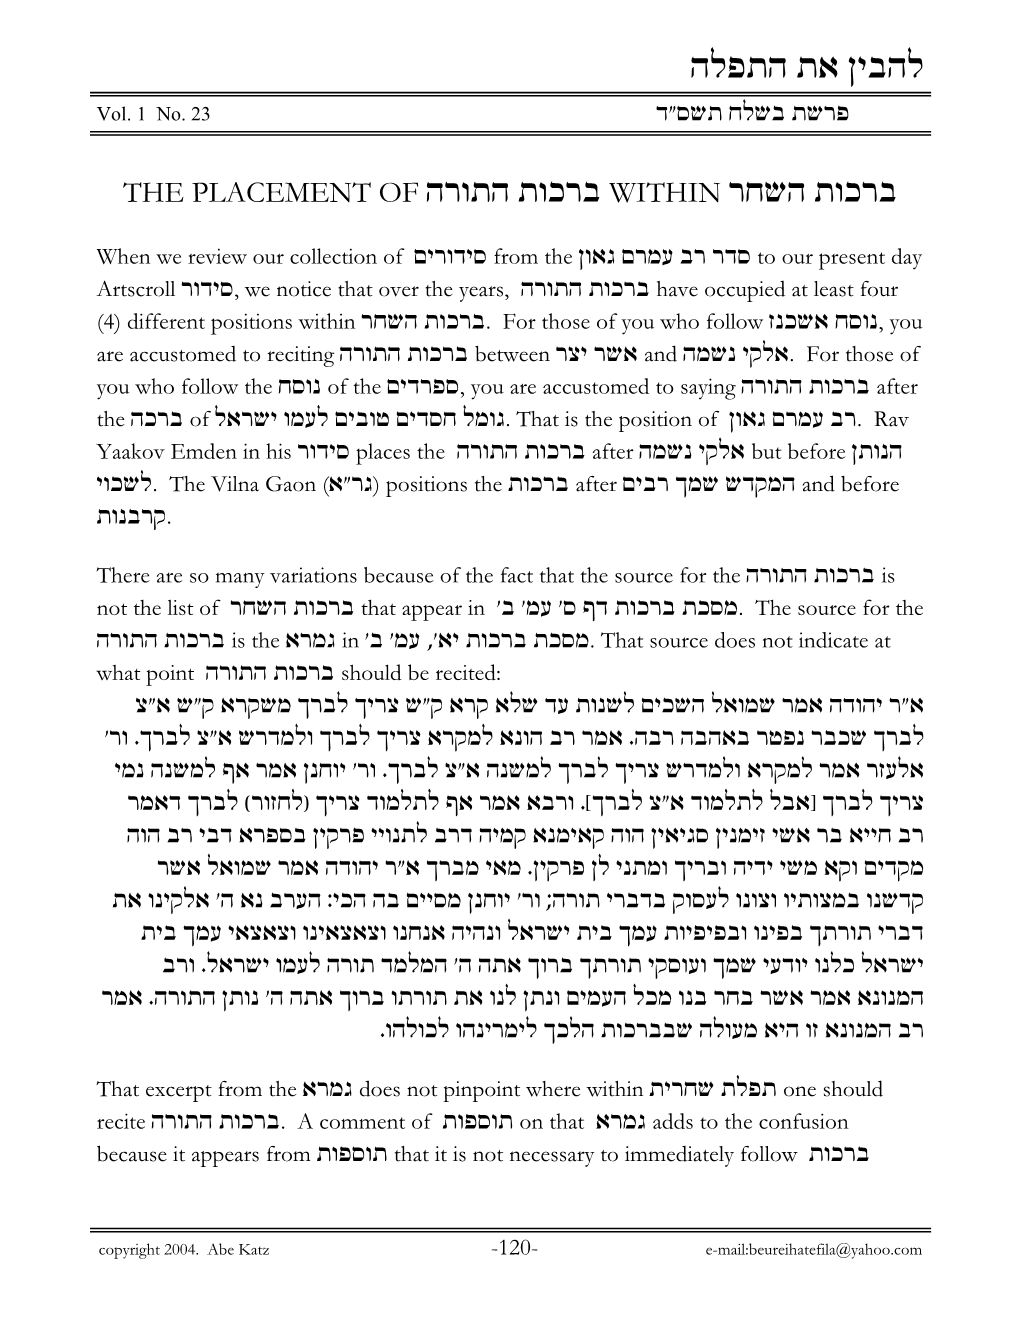 The Placement of the Paragraphs of Birchos